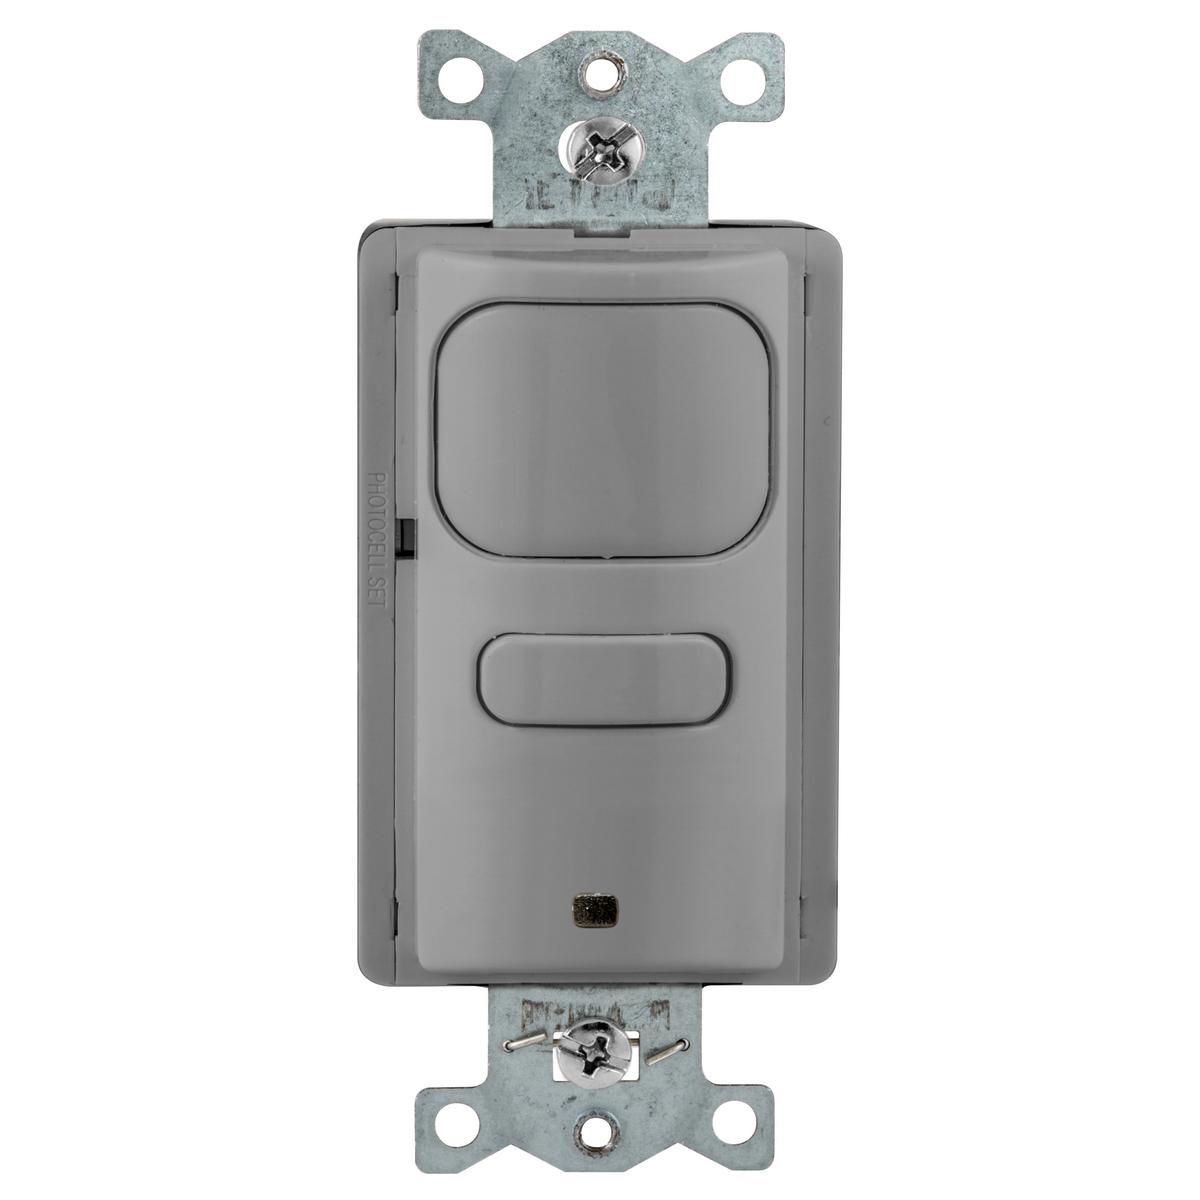 Hubbell AP2001GY1 Occupancy Sensing Products, Wall Switch,Vacancy, Passive Infrared, 1 Relay, 1000 Square Feet, 800 WIncandescent,1000W Fluorescent @ 120V AC, 1800W Fluorescent @ 277VAC,120/277V AC,With Photocell, Gray 